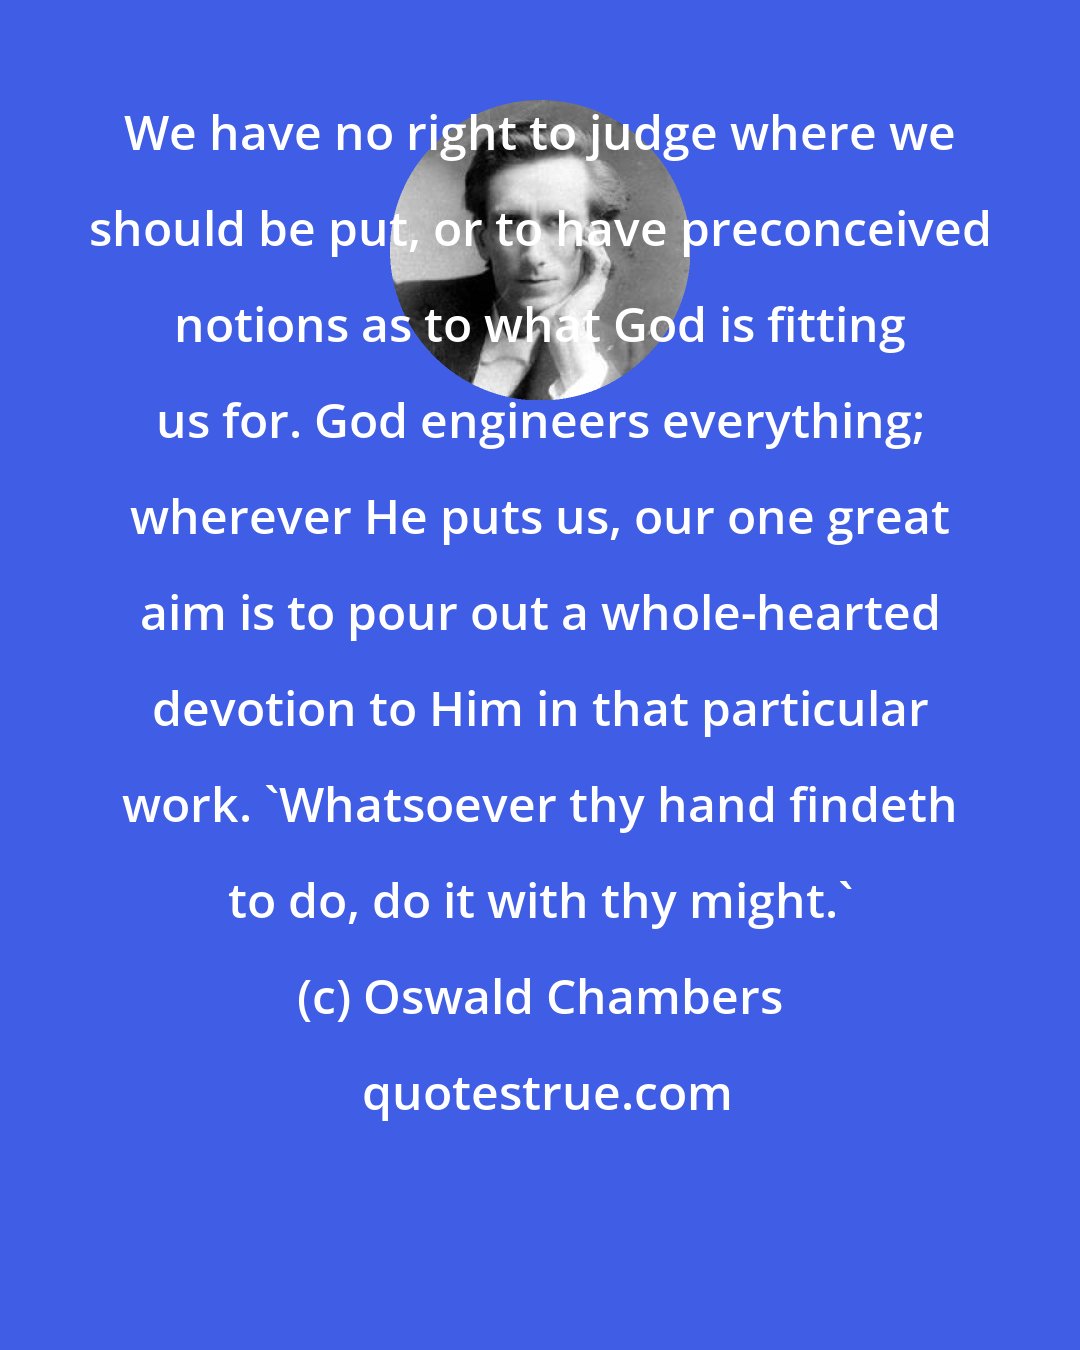 Oswald Chambers: We have no right to judge where we should be put, or to have preconceived notions as to what God is fitting us for. God engineers everything; wherever He puts us, our one great aim is to pour out a whole-hearted devotion to Him in that particular work. 'Whatsoever thy hand findeth to do, do it with thy might.'